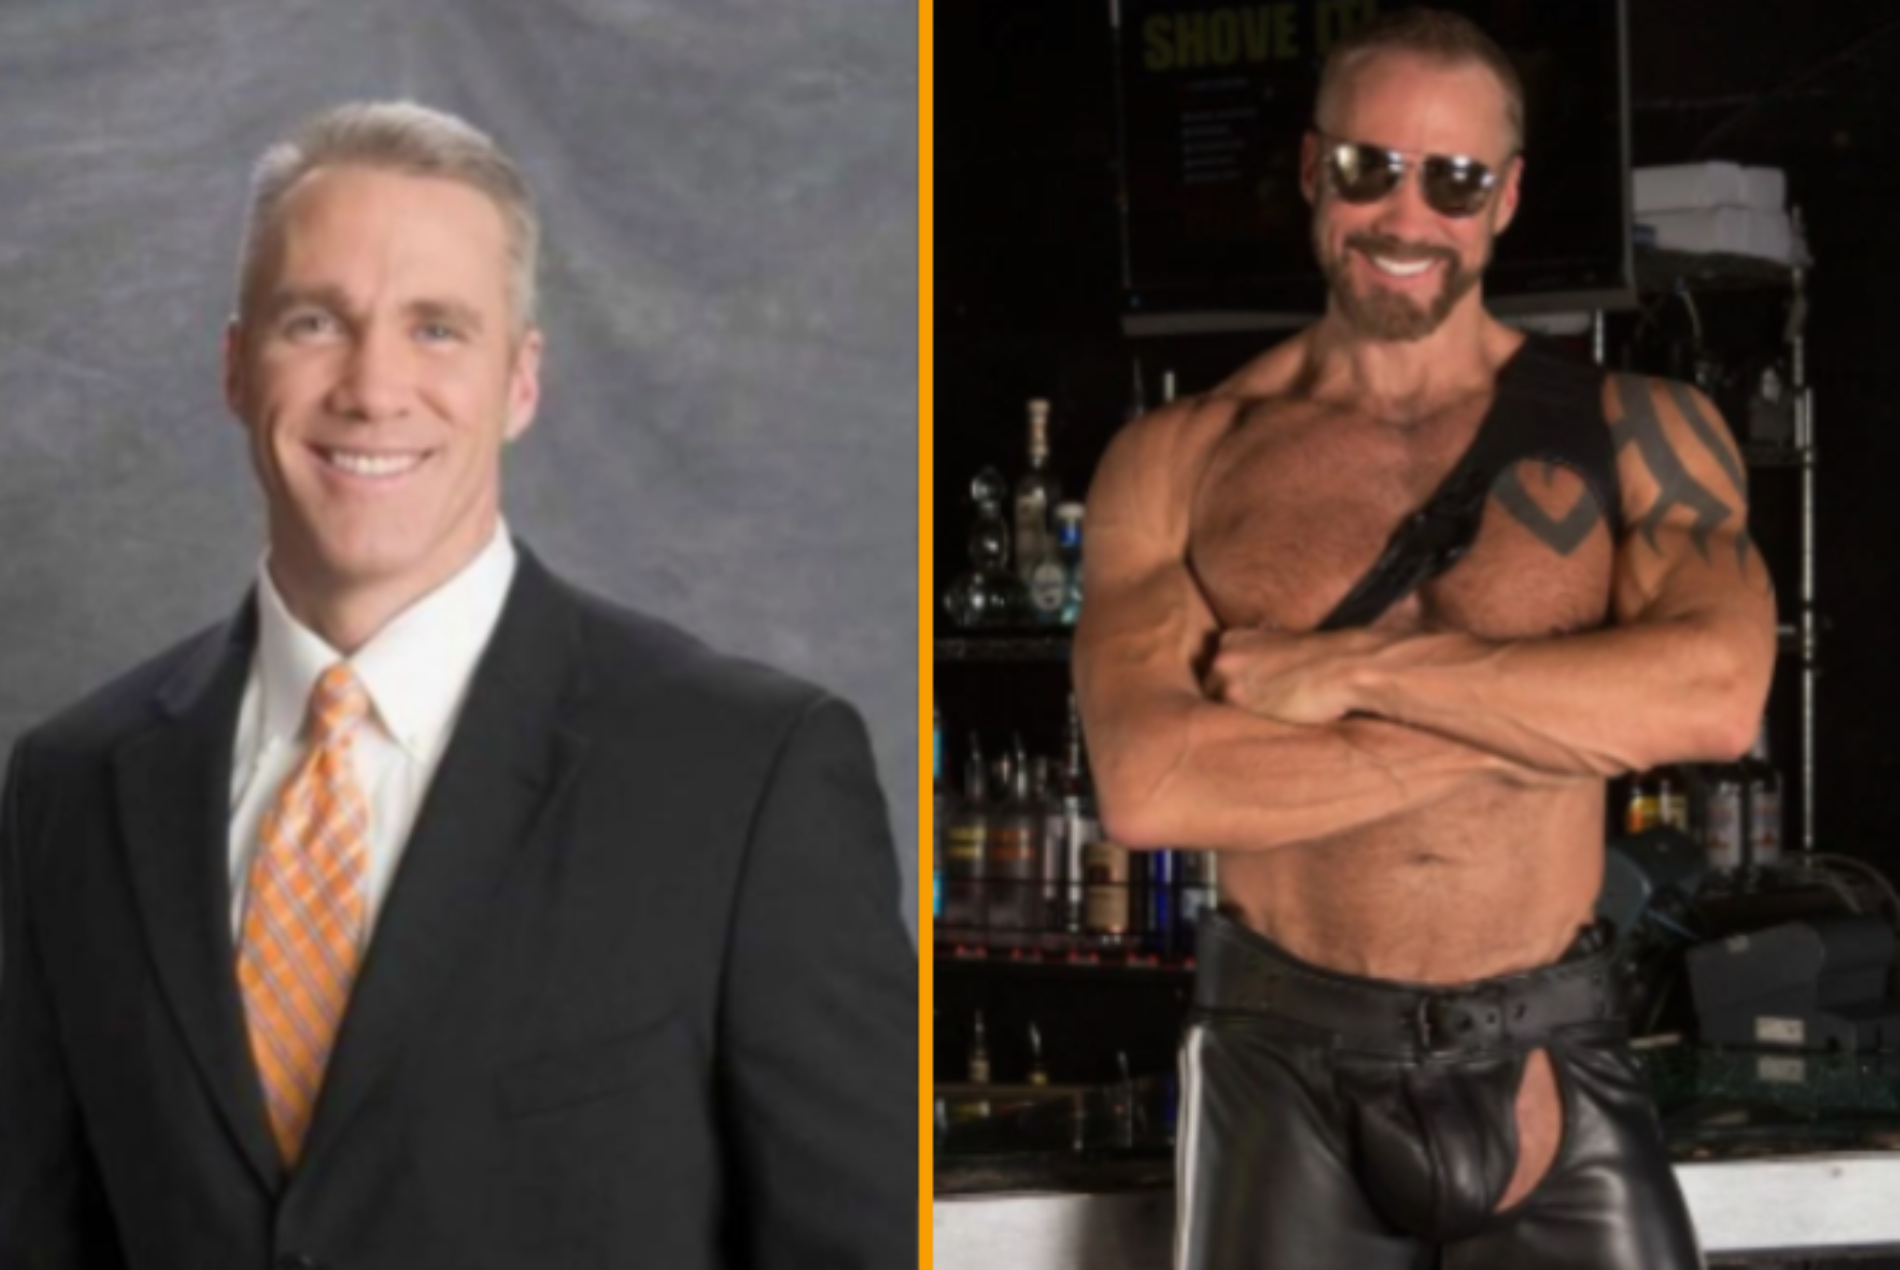 “I am as comfortable in a suit as I am a jockstrap.” Former Fox News anchor, Jim Walker, discusses new life as a gay porn star Dallas Steele